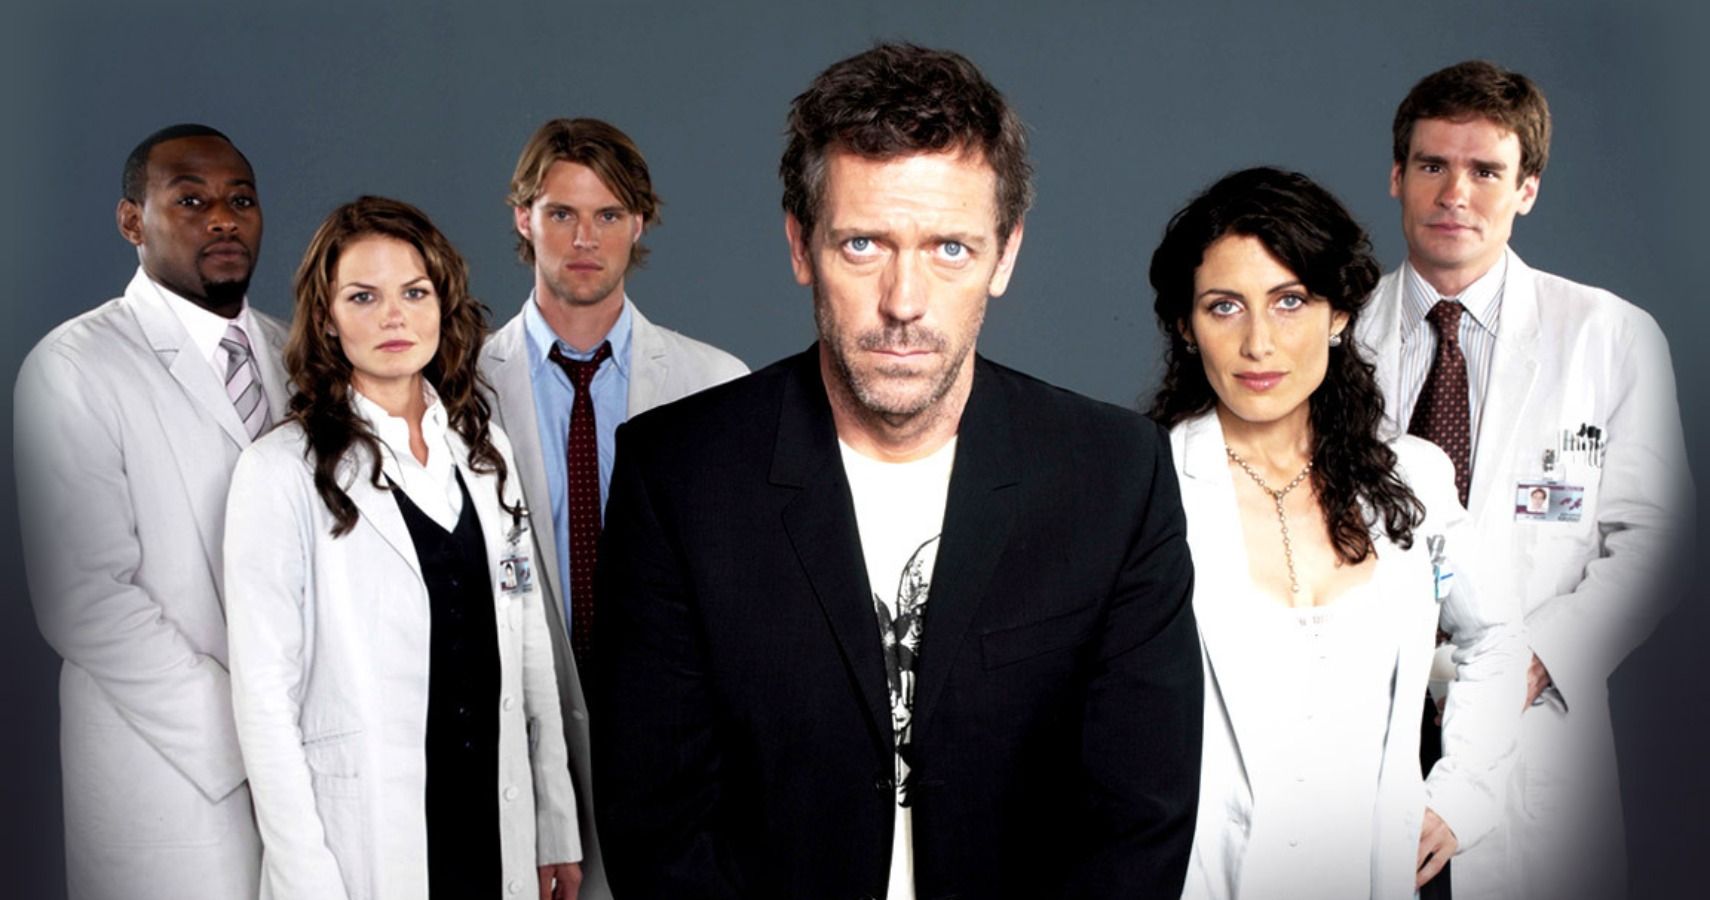 House: The 10 Best Episodes In Season 1 (According To IMDb)